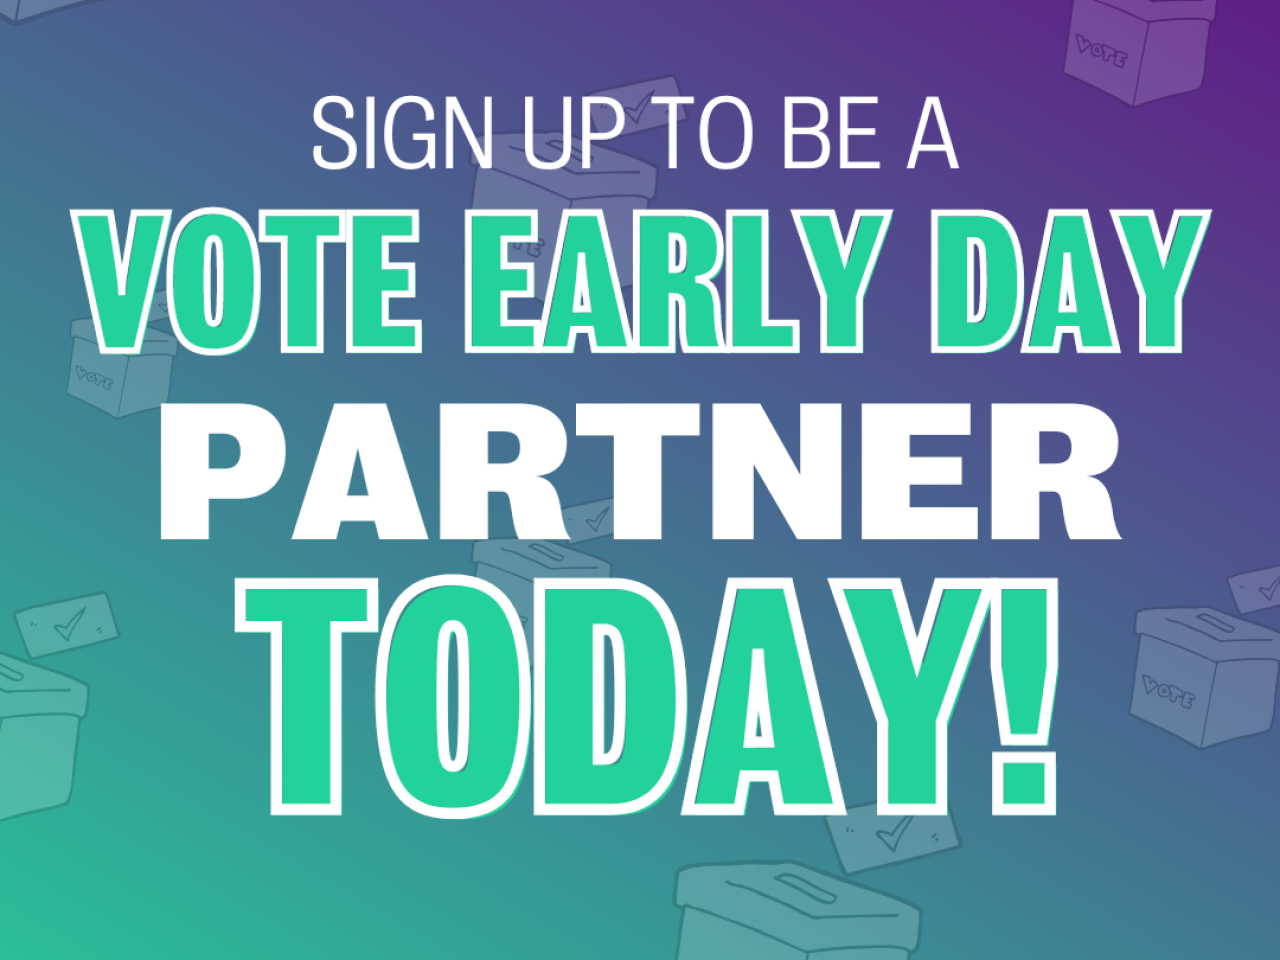 "Signe up to be a Vote Early Day partner today."